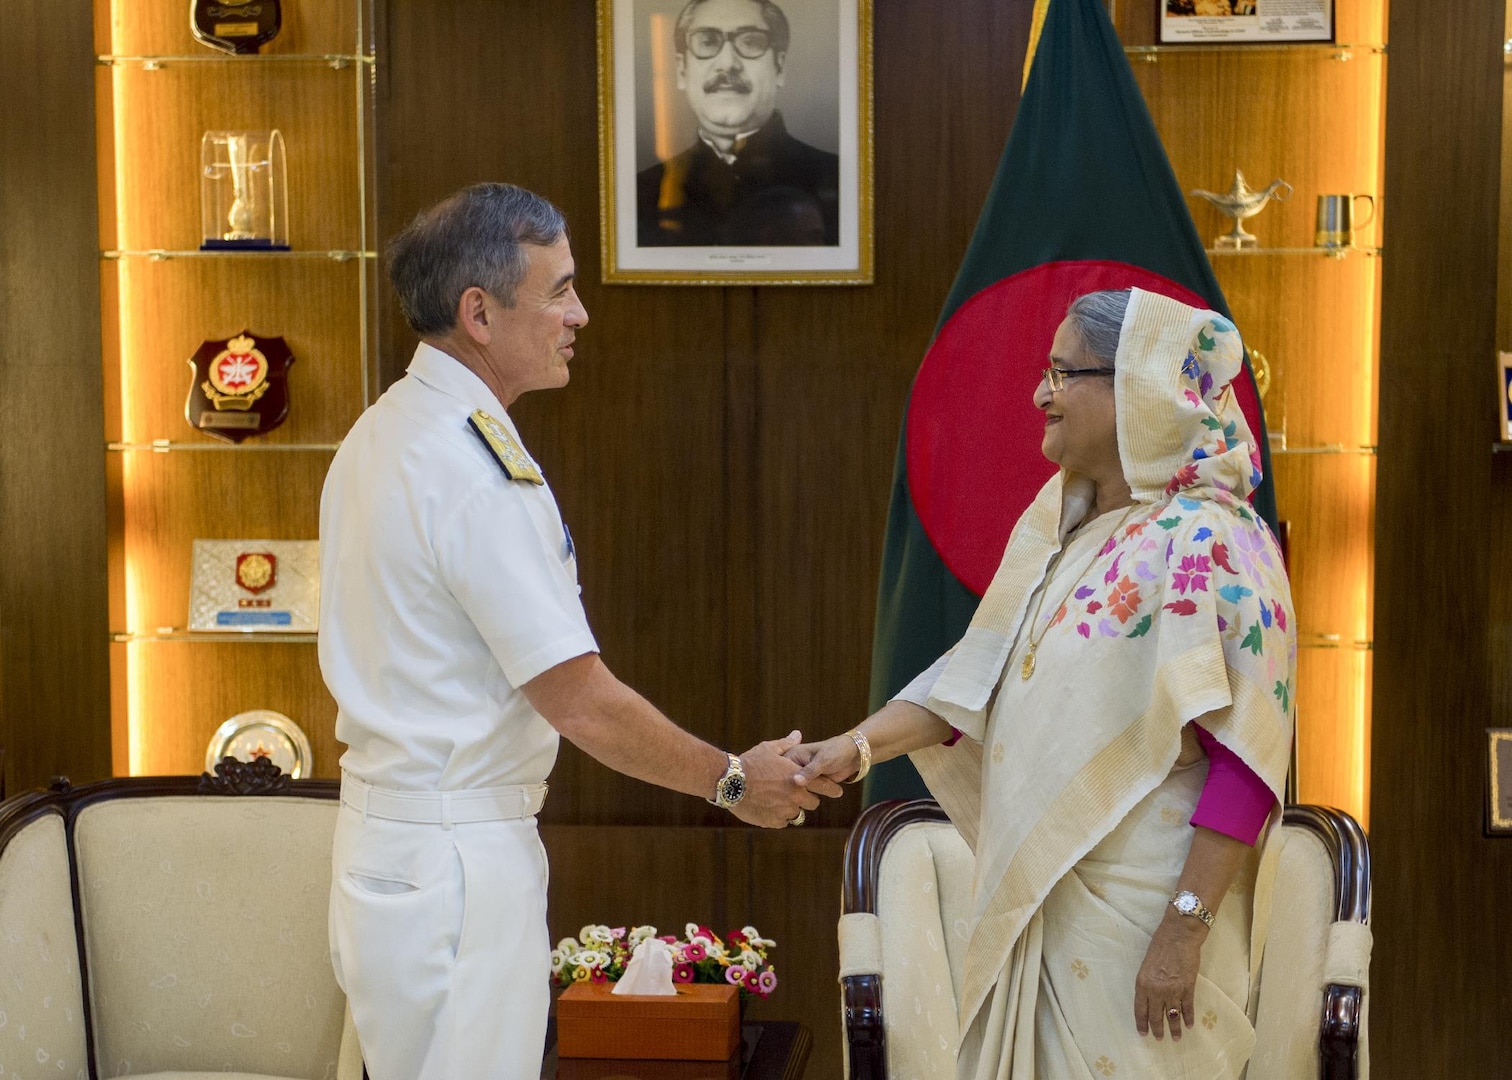 170709-N-WY954-136DHAKA, BANGLADESH (July 9, 2017) – Adm. Harry Harris, Commander U.S. Pacific Command (PACOM), meets with Prime Minister of Bangladesh Sheikh Hasina. This is Harris’ first visit to Bangladesh as PACOM commander. During the visit he met with counterparts and government officials for discussions on military cooperation and regional security initiatives in the Indo-Asia Pacific. (U.S. Navy photo by Mass Communications Specialist 2nd Class Robin W. Peak/ Released)